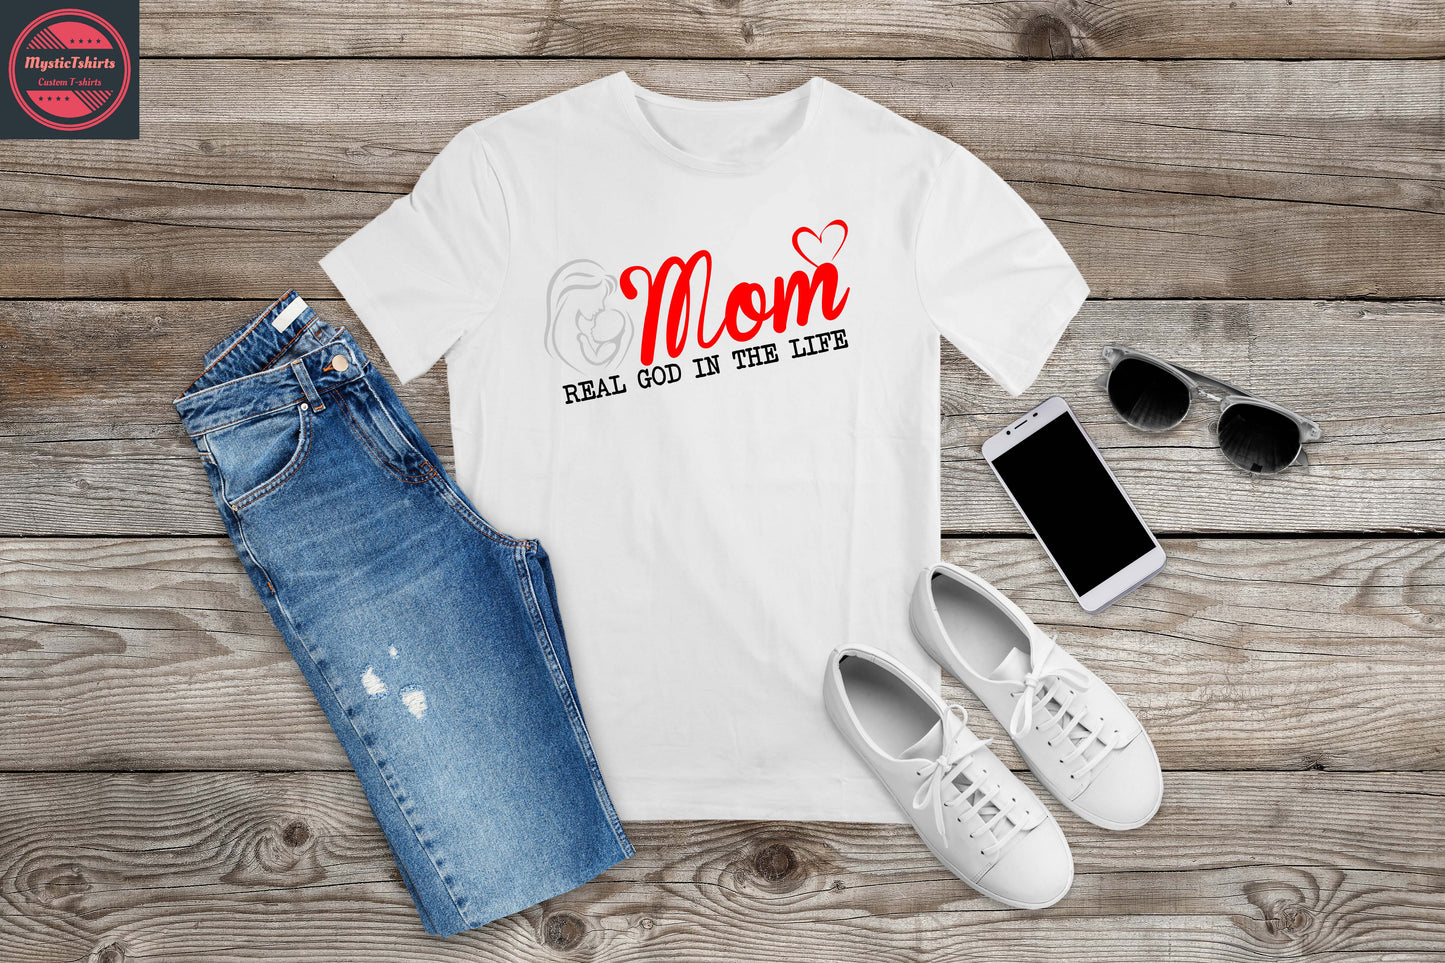 320. MOM REAL GOD IN THE LIFE, Custom Made Shirt, Personalized T-Shirt, Custom Text, Make Your Own Shirt, Custom Tee